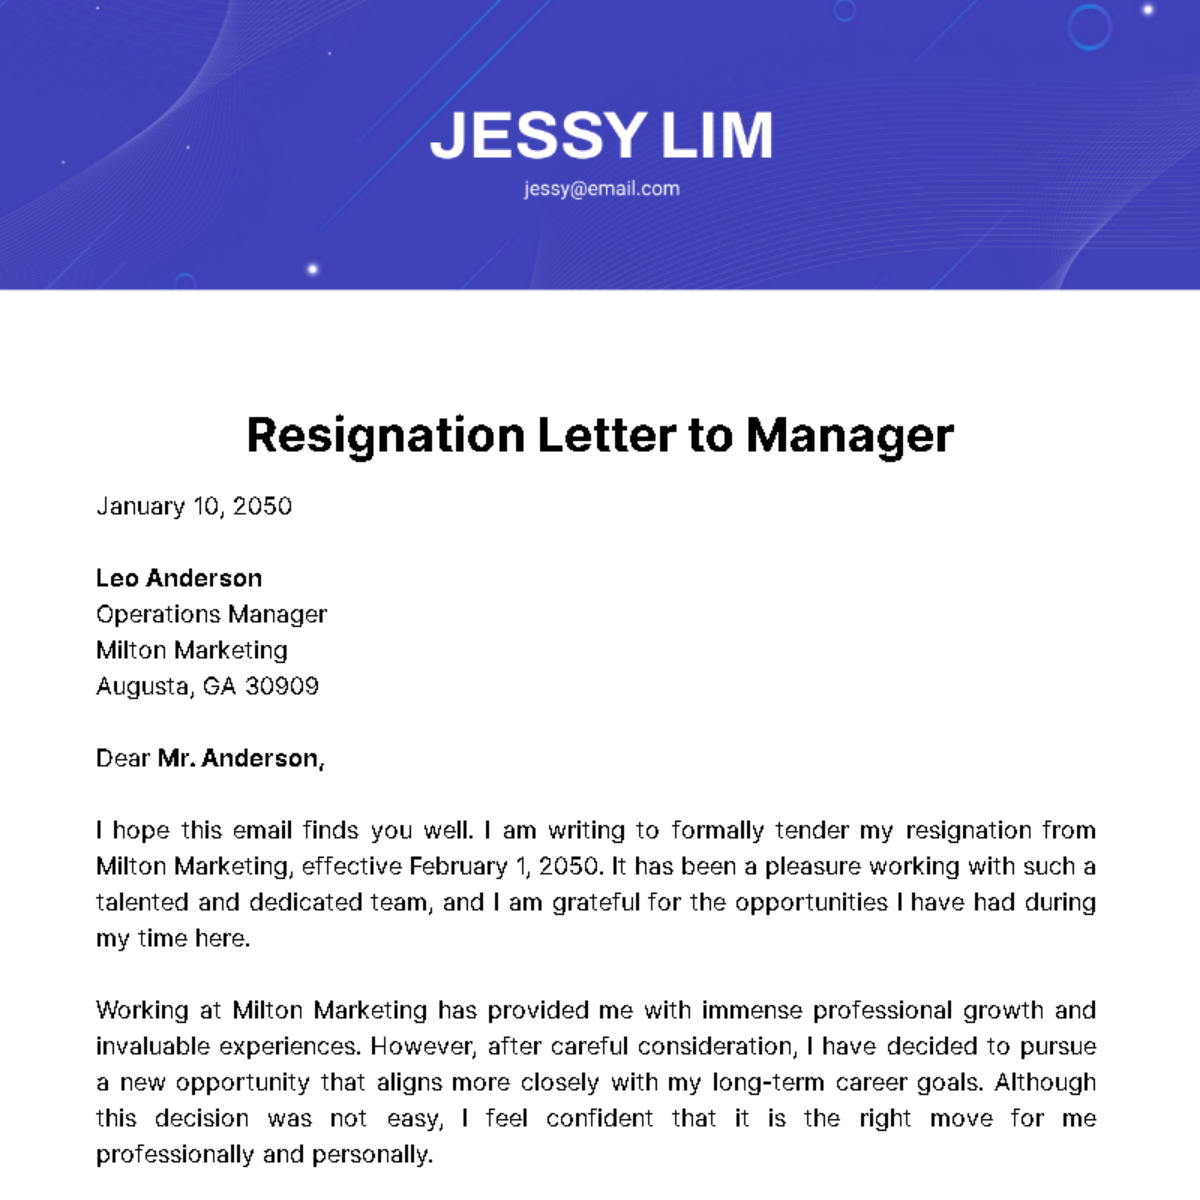 Resignation Letter to Manager  Template